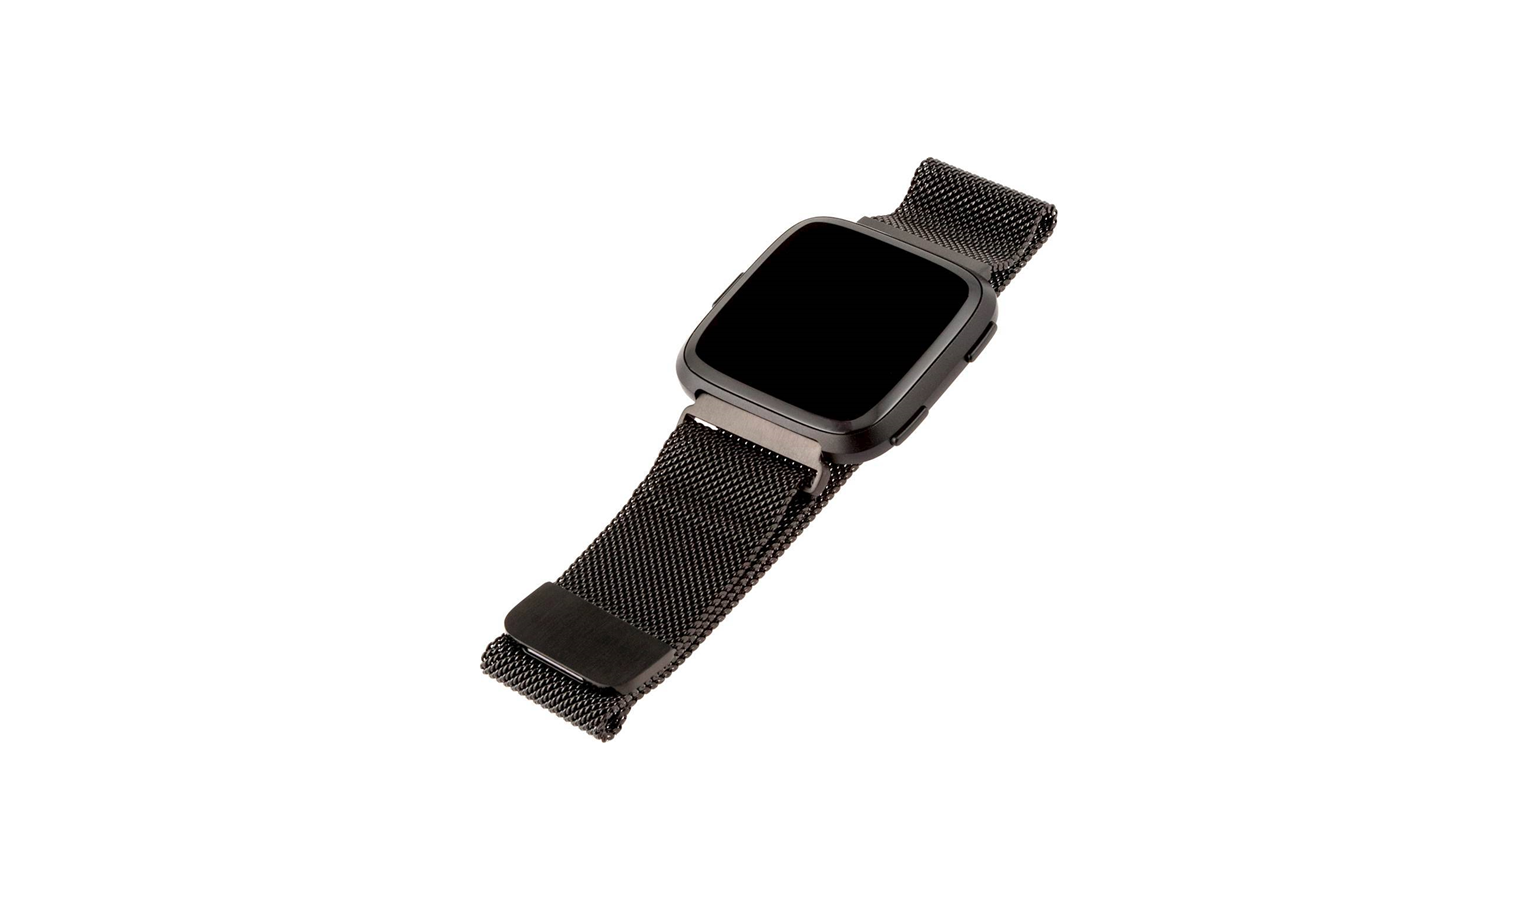 fitbit versa stainless steel mesh band